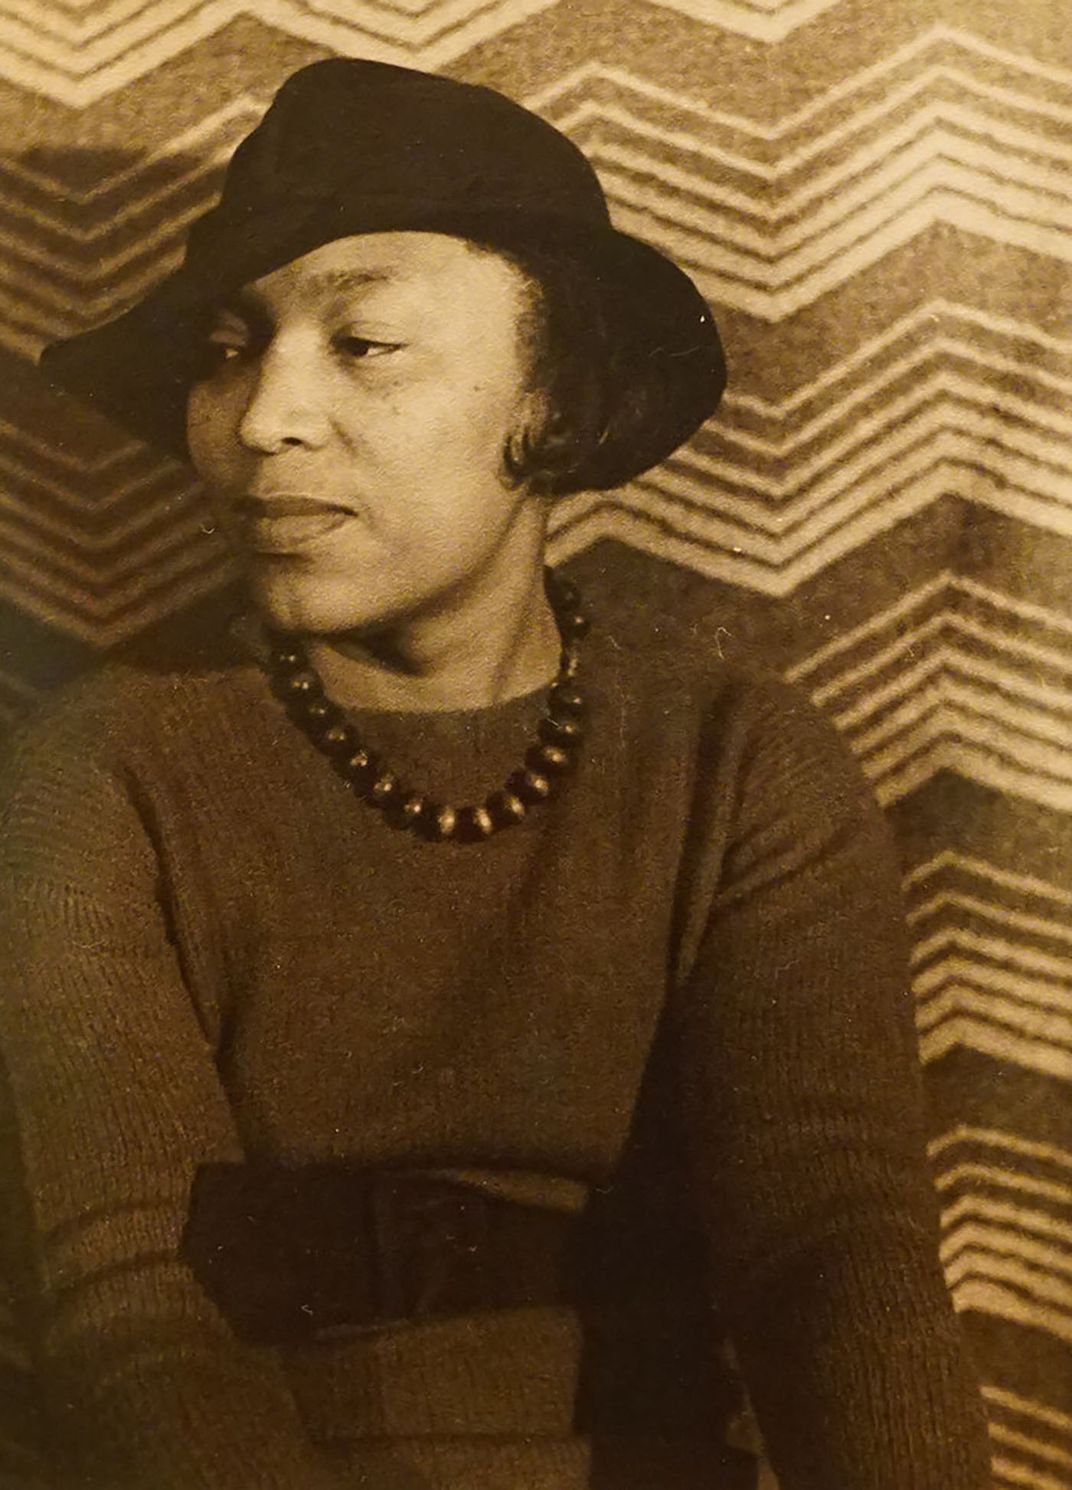 portrait of Zora Neale Hurston wearing a dark hat in front of a pattered cloth backdrop